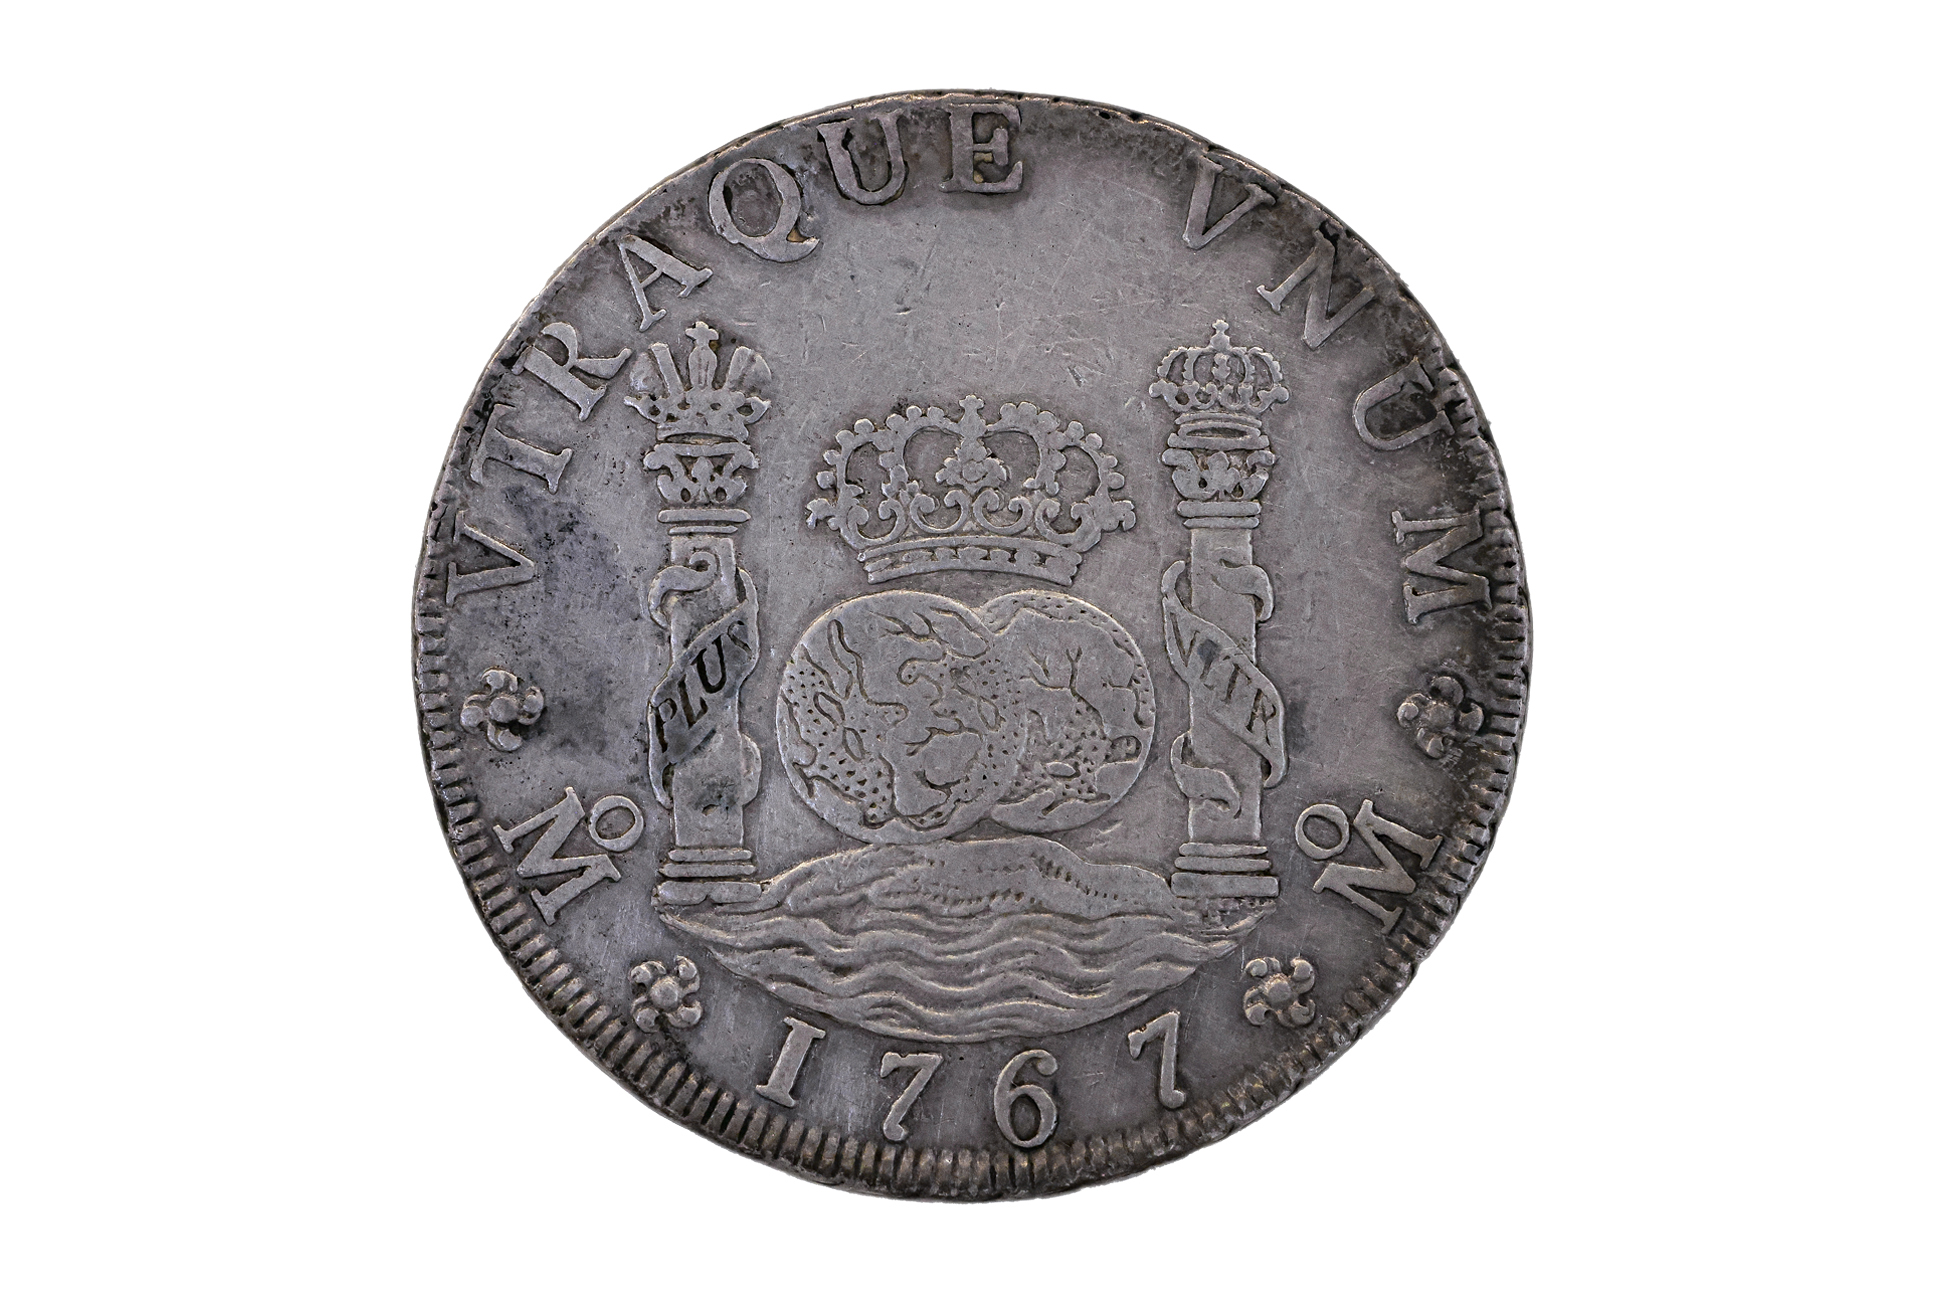 MEXICO 8 REALES PILLAR 1767 - Image 2 of 2